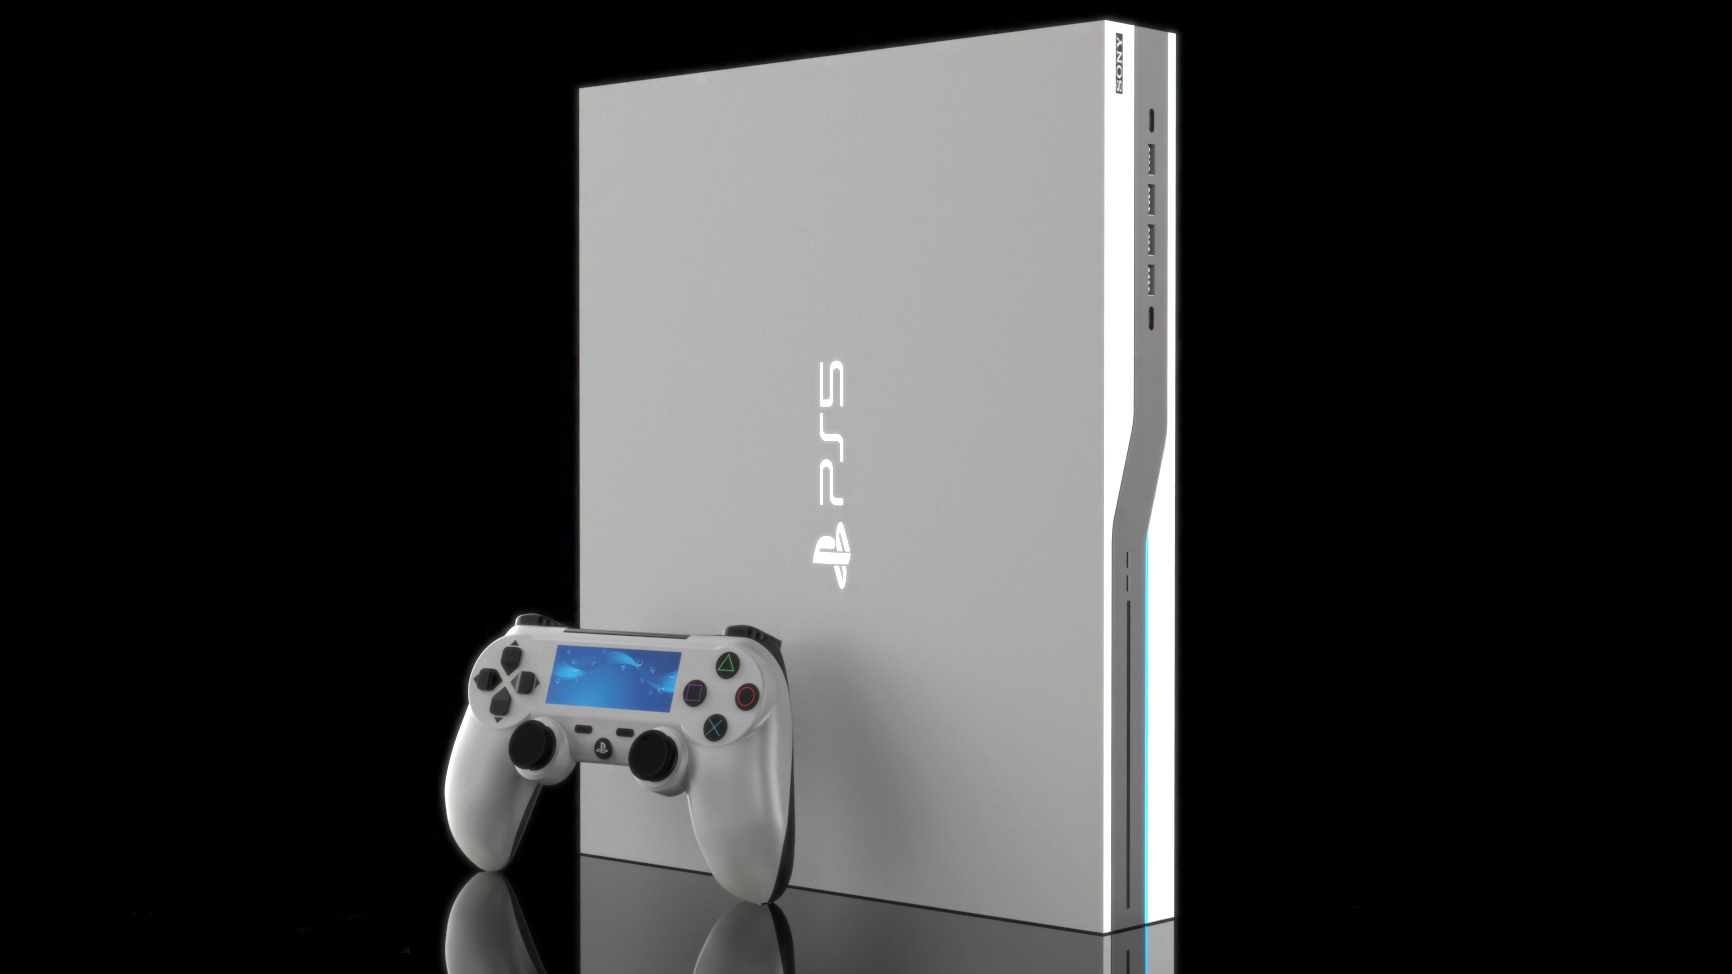 ps4 pro price after ps5